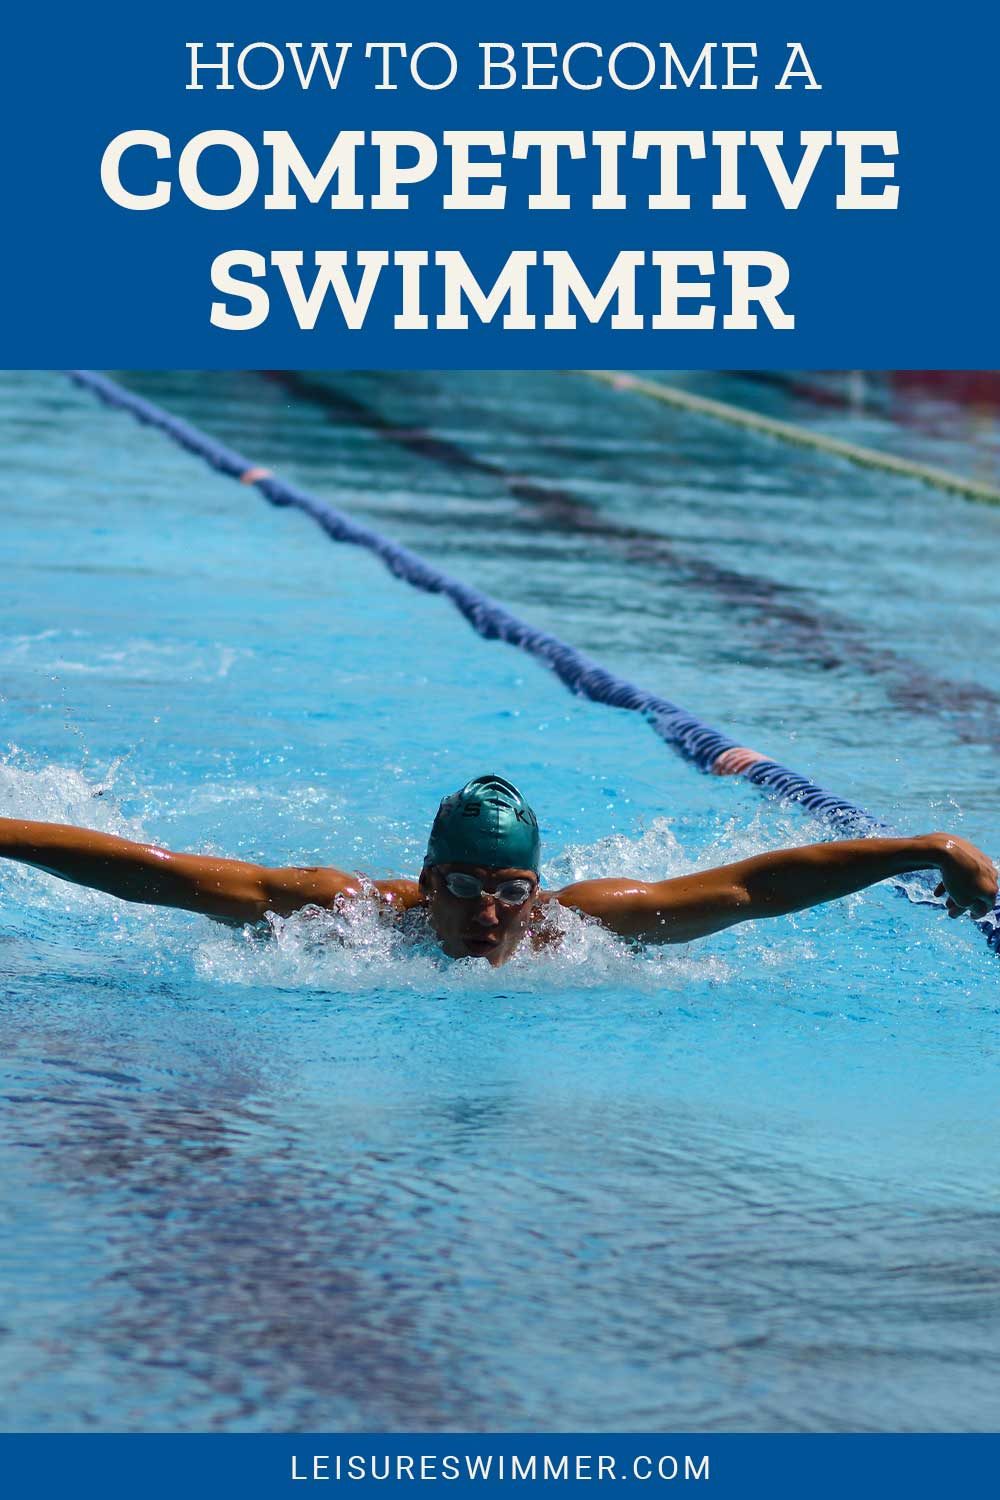 Man swimming with hands wide open - Becoming A Competitive Swimmer.